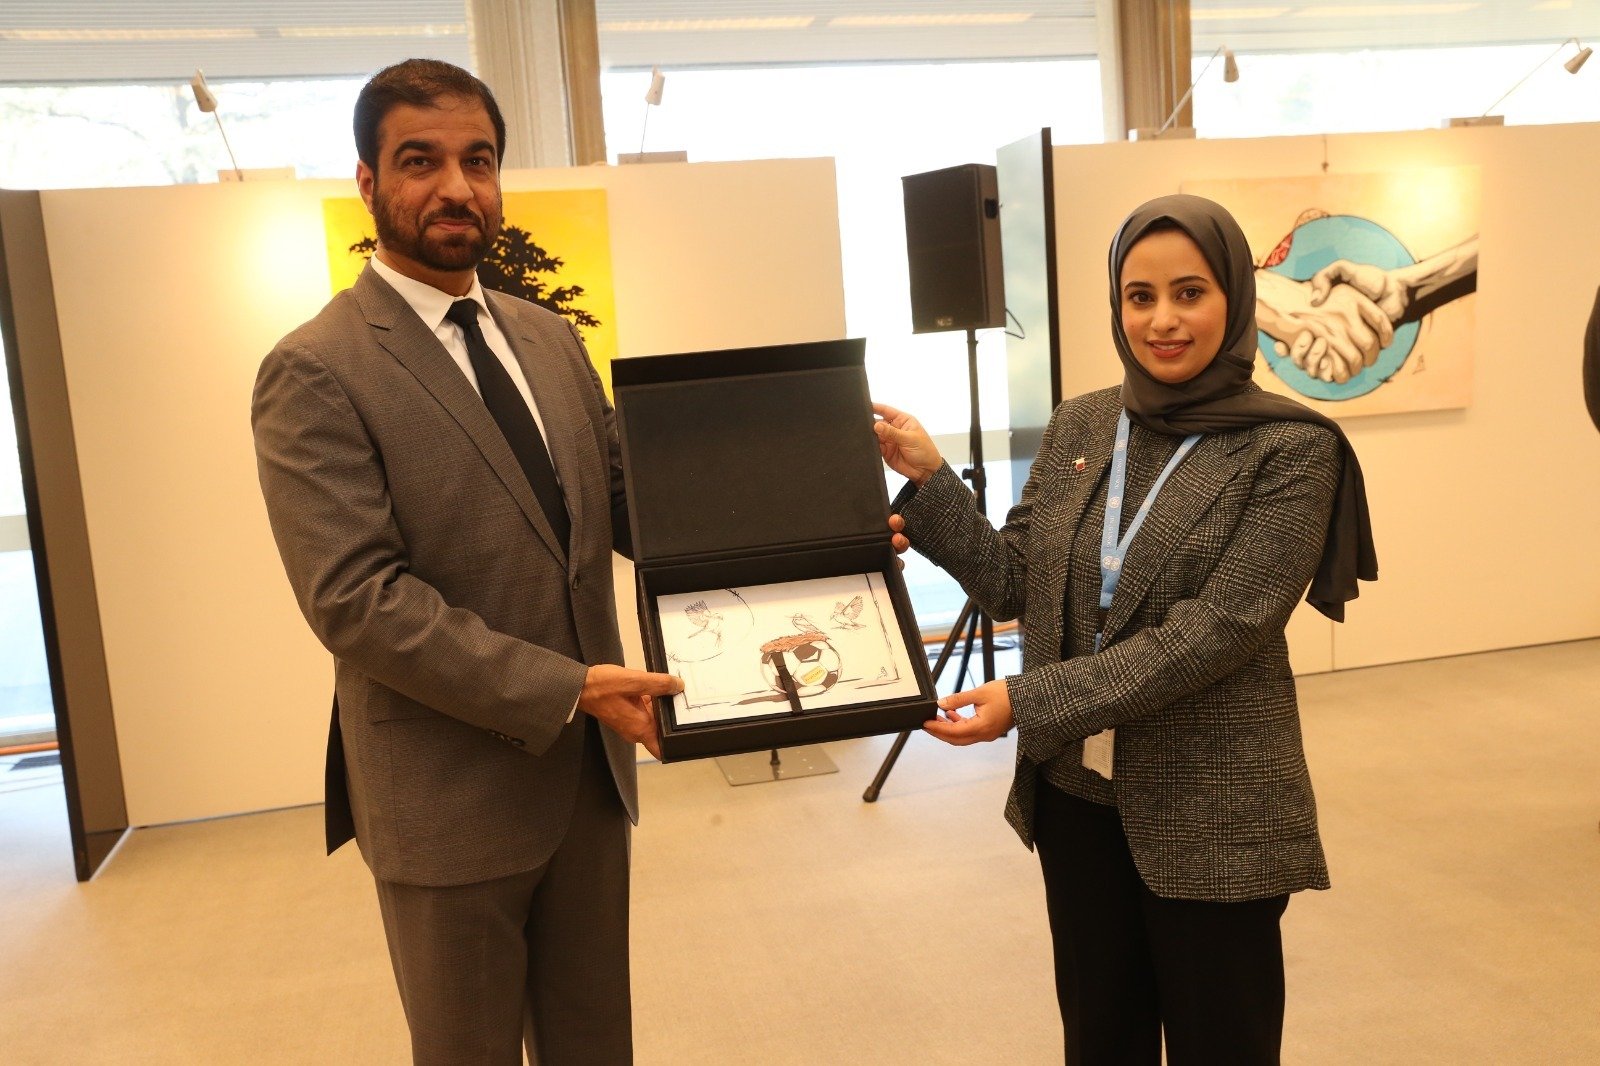 ‘Human Rights and Football’ Painting Exhibition Concluded in Geneva